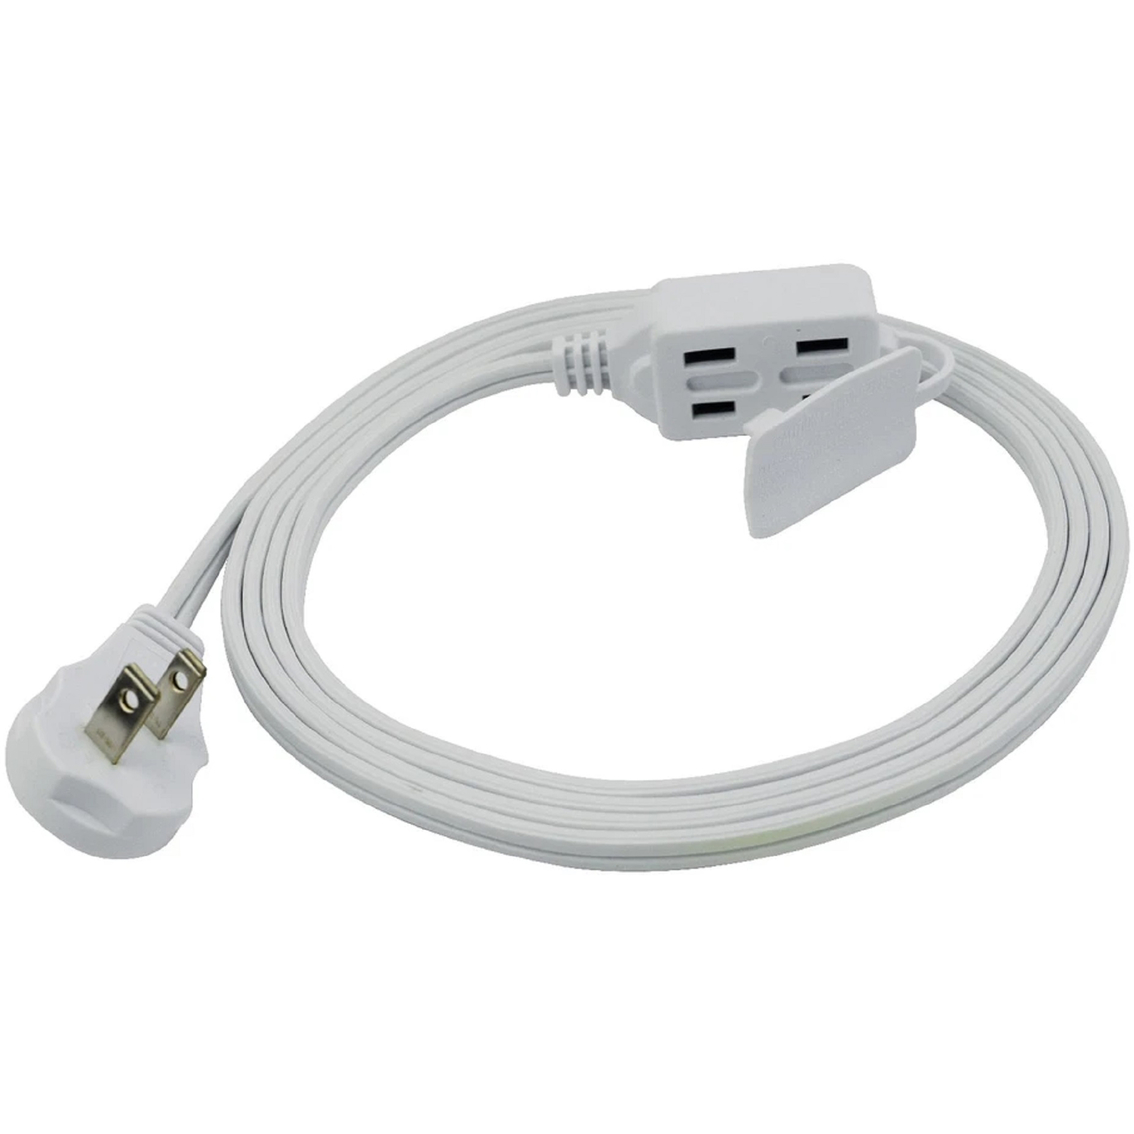 Prime Wire & Cable 7 ft. SnugPlug 3 Outlet Household Extension Cord - Image 2 of 2